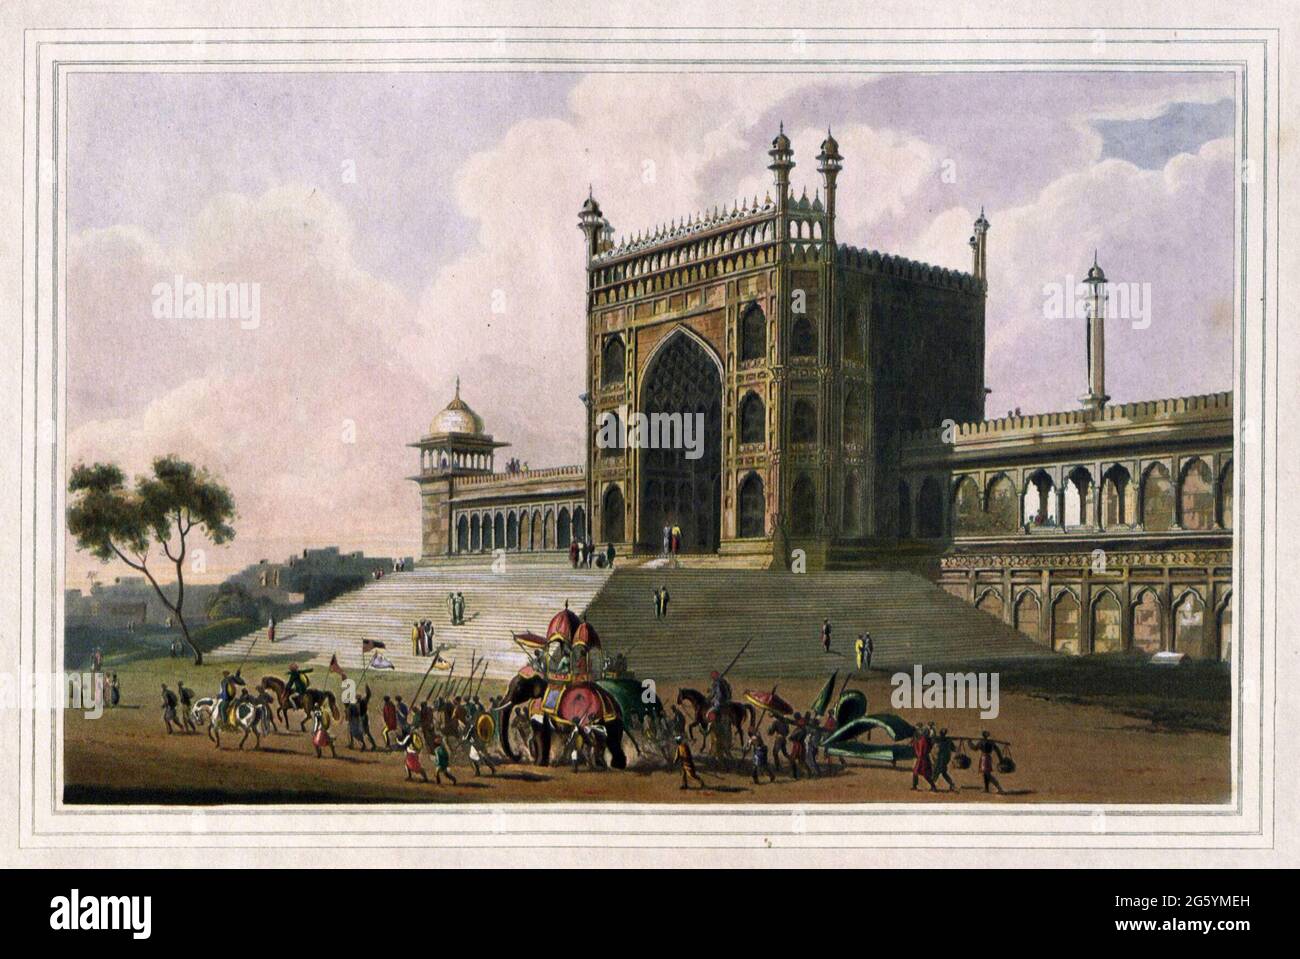 Eastern Gate of the Jummah Musjid at Delhi [Here as  JUMMA MUSJED] From the book ' Oriental scenery: one hundred and fifty views of the architecture, antiquities and landscape scenery of Hindoostan ' by Thomas Daniell, and William Daniell, Published in London by the Authors January 1, 1812 Stock Photo